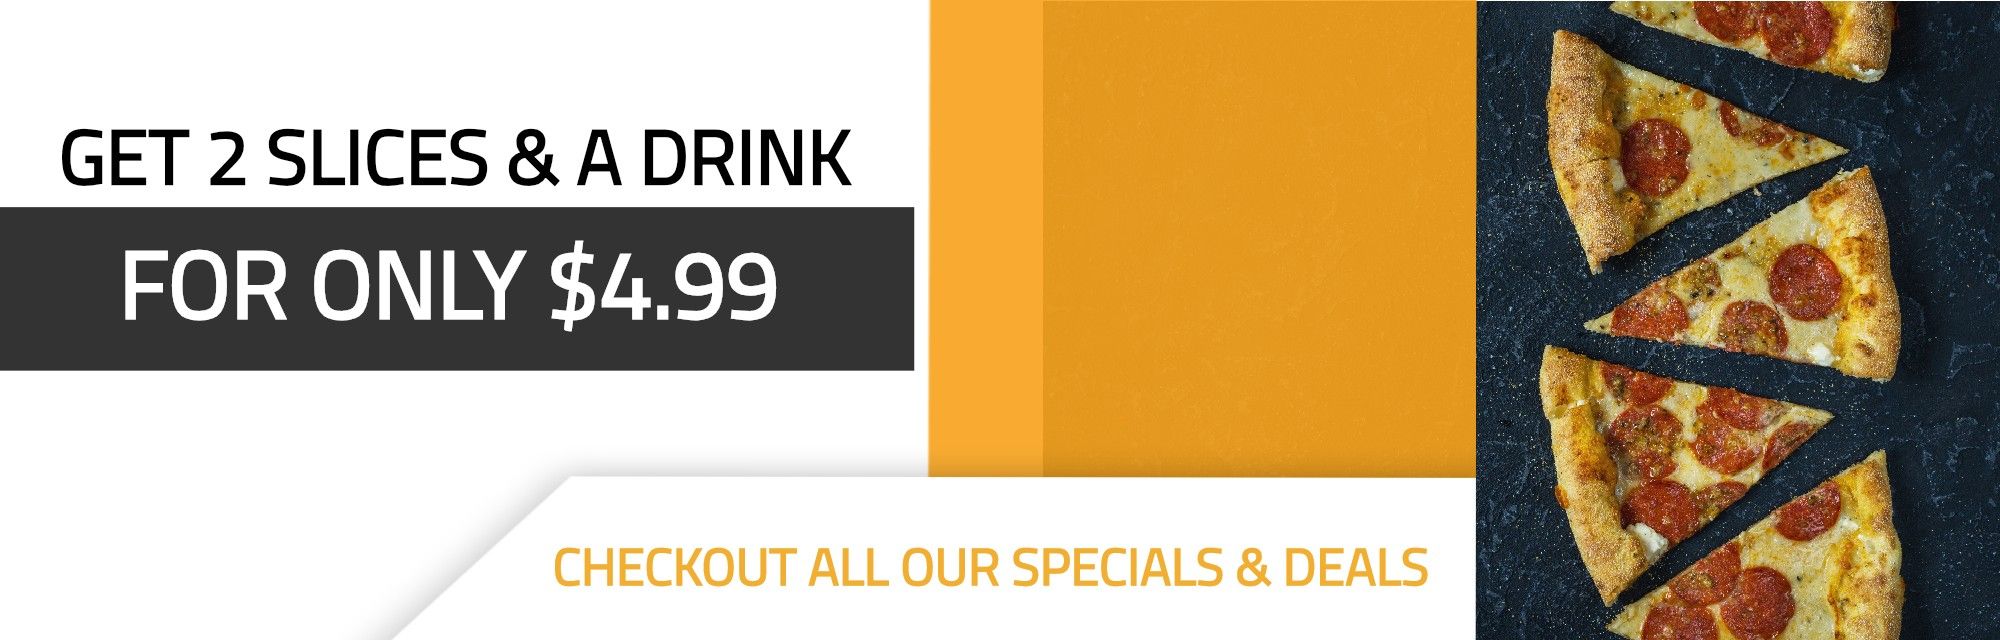 Get 2 slices & a drink for only $4.99. Checkout all our specials and deals